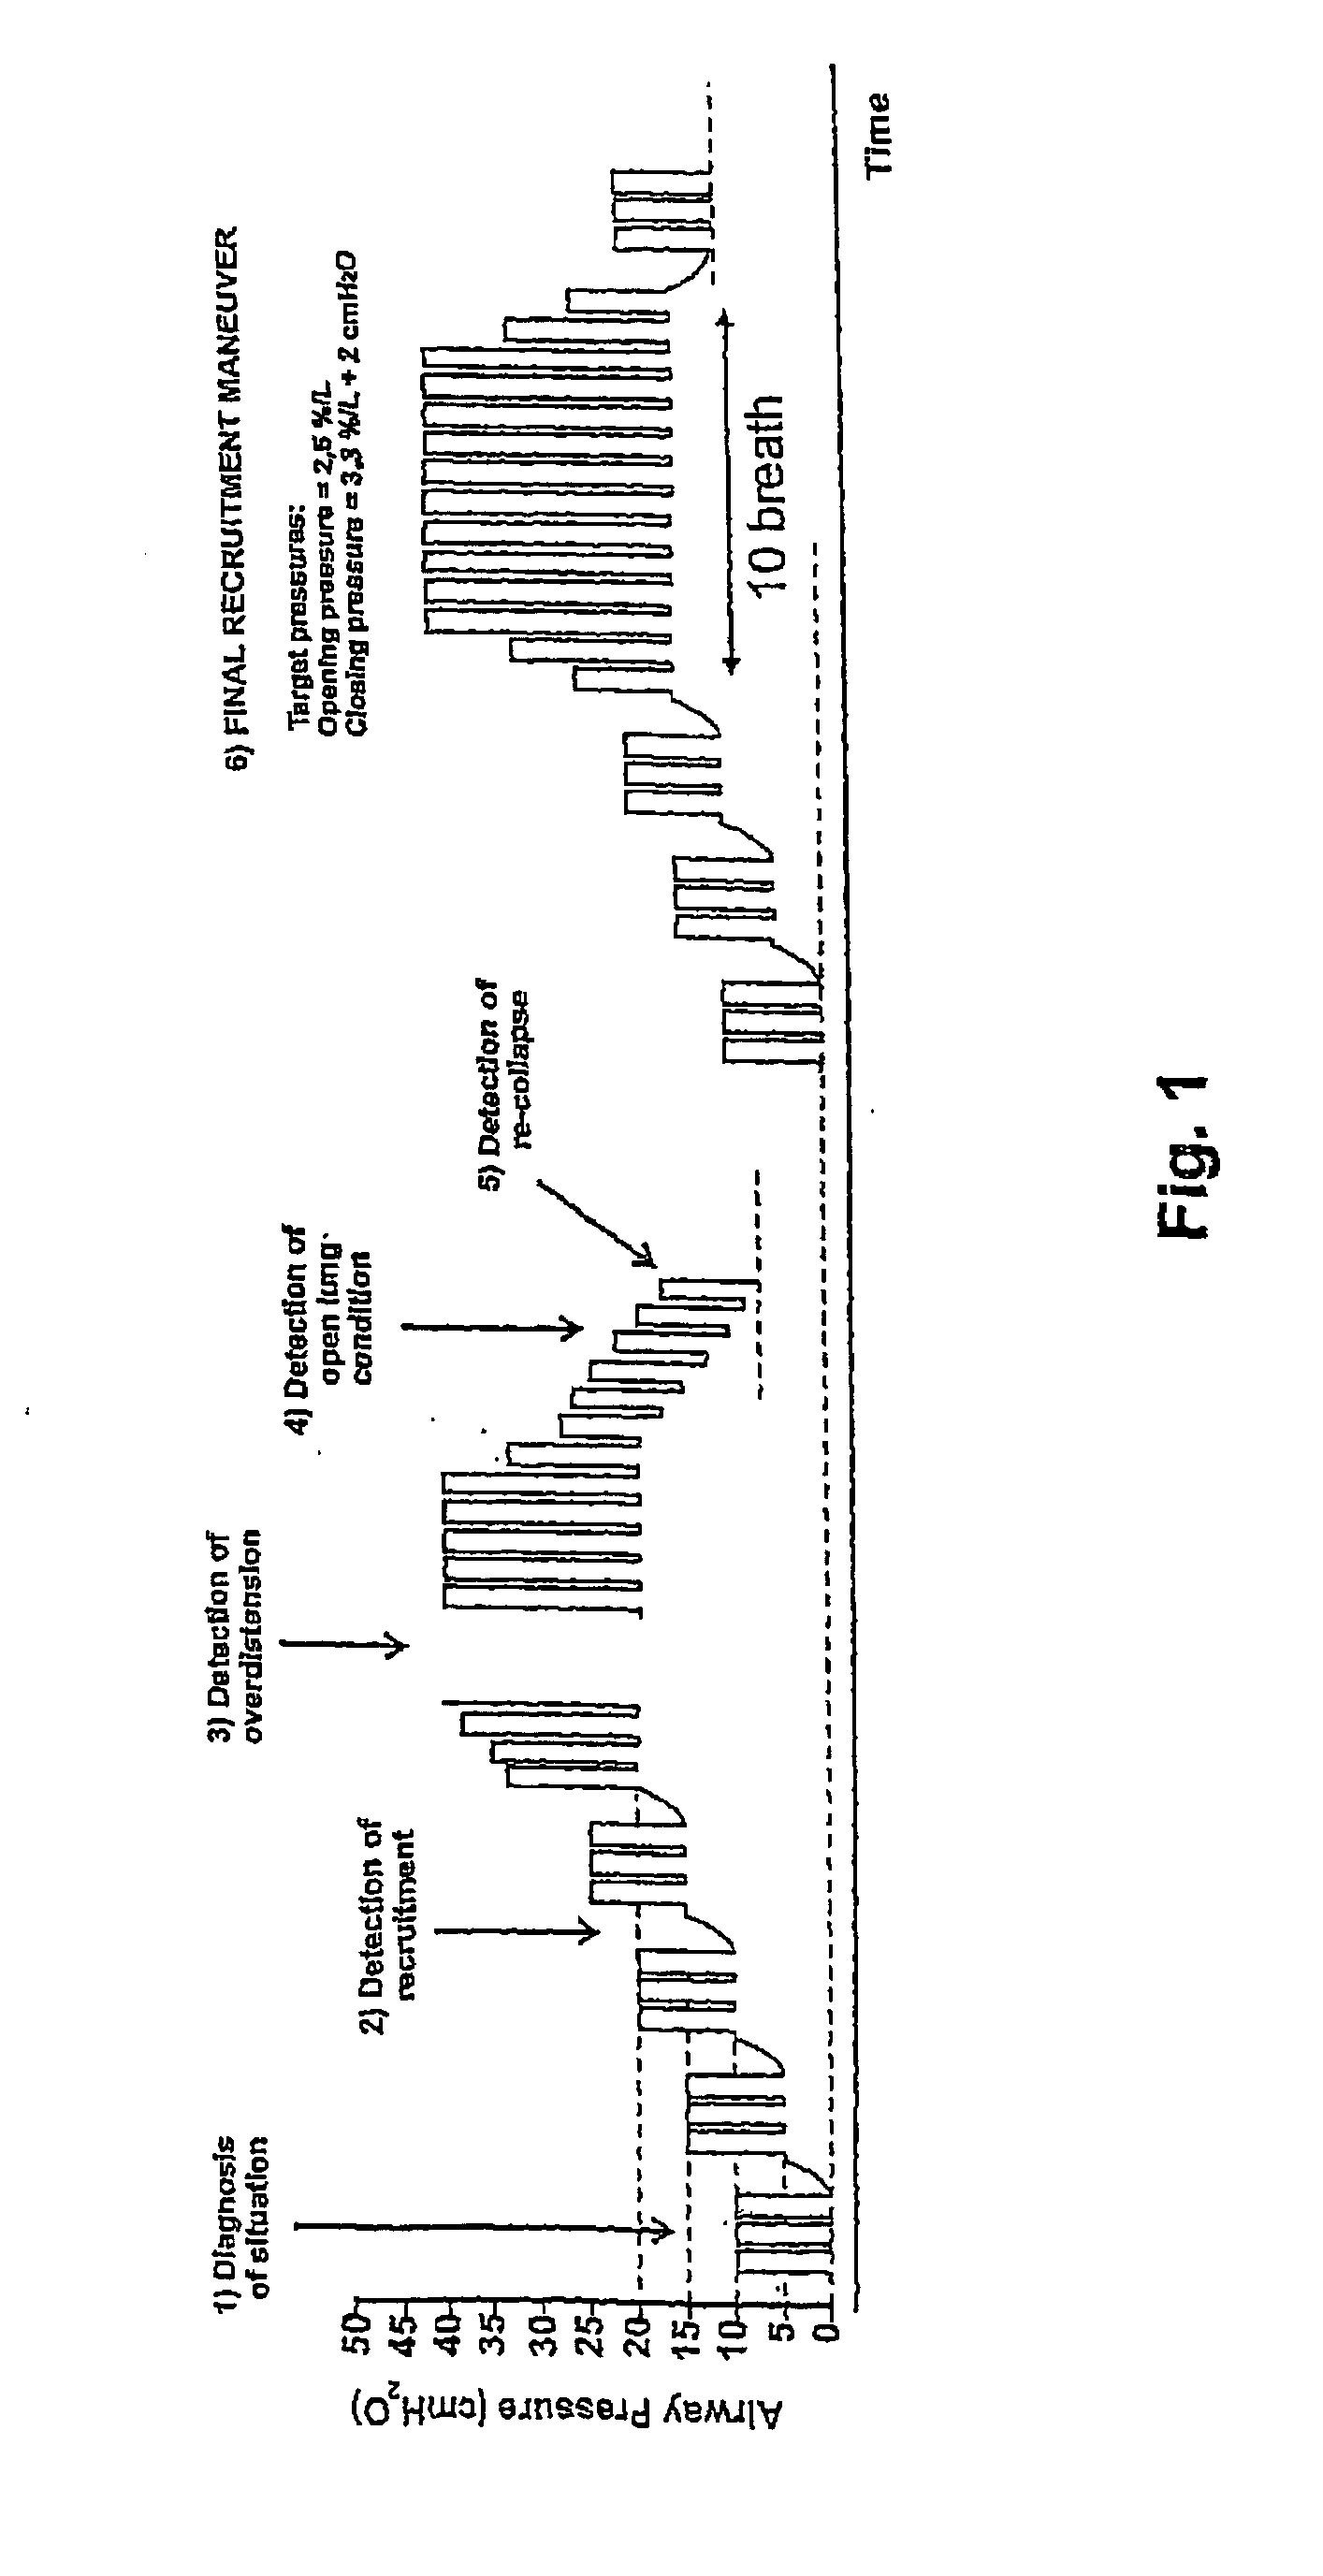 Method and apparatus for changing the concentration of a target gas at the blood compartment of a patient's lung during artificial ventilation